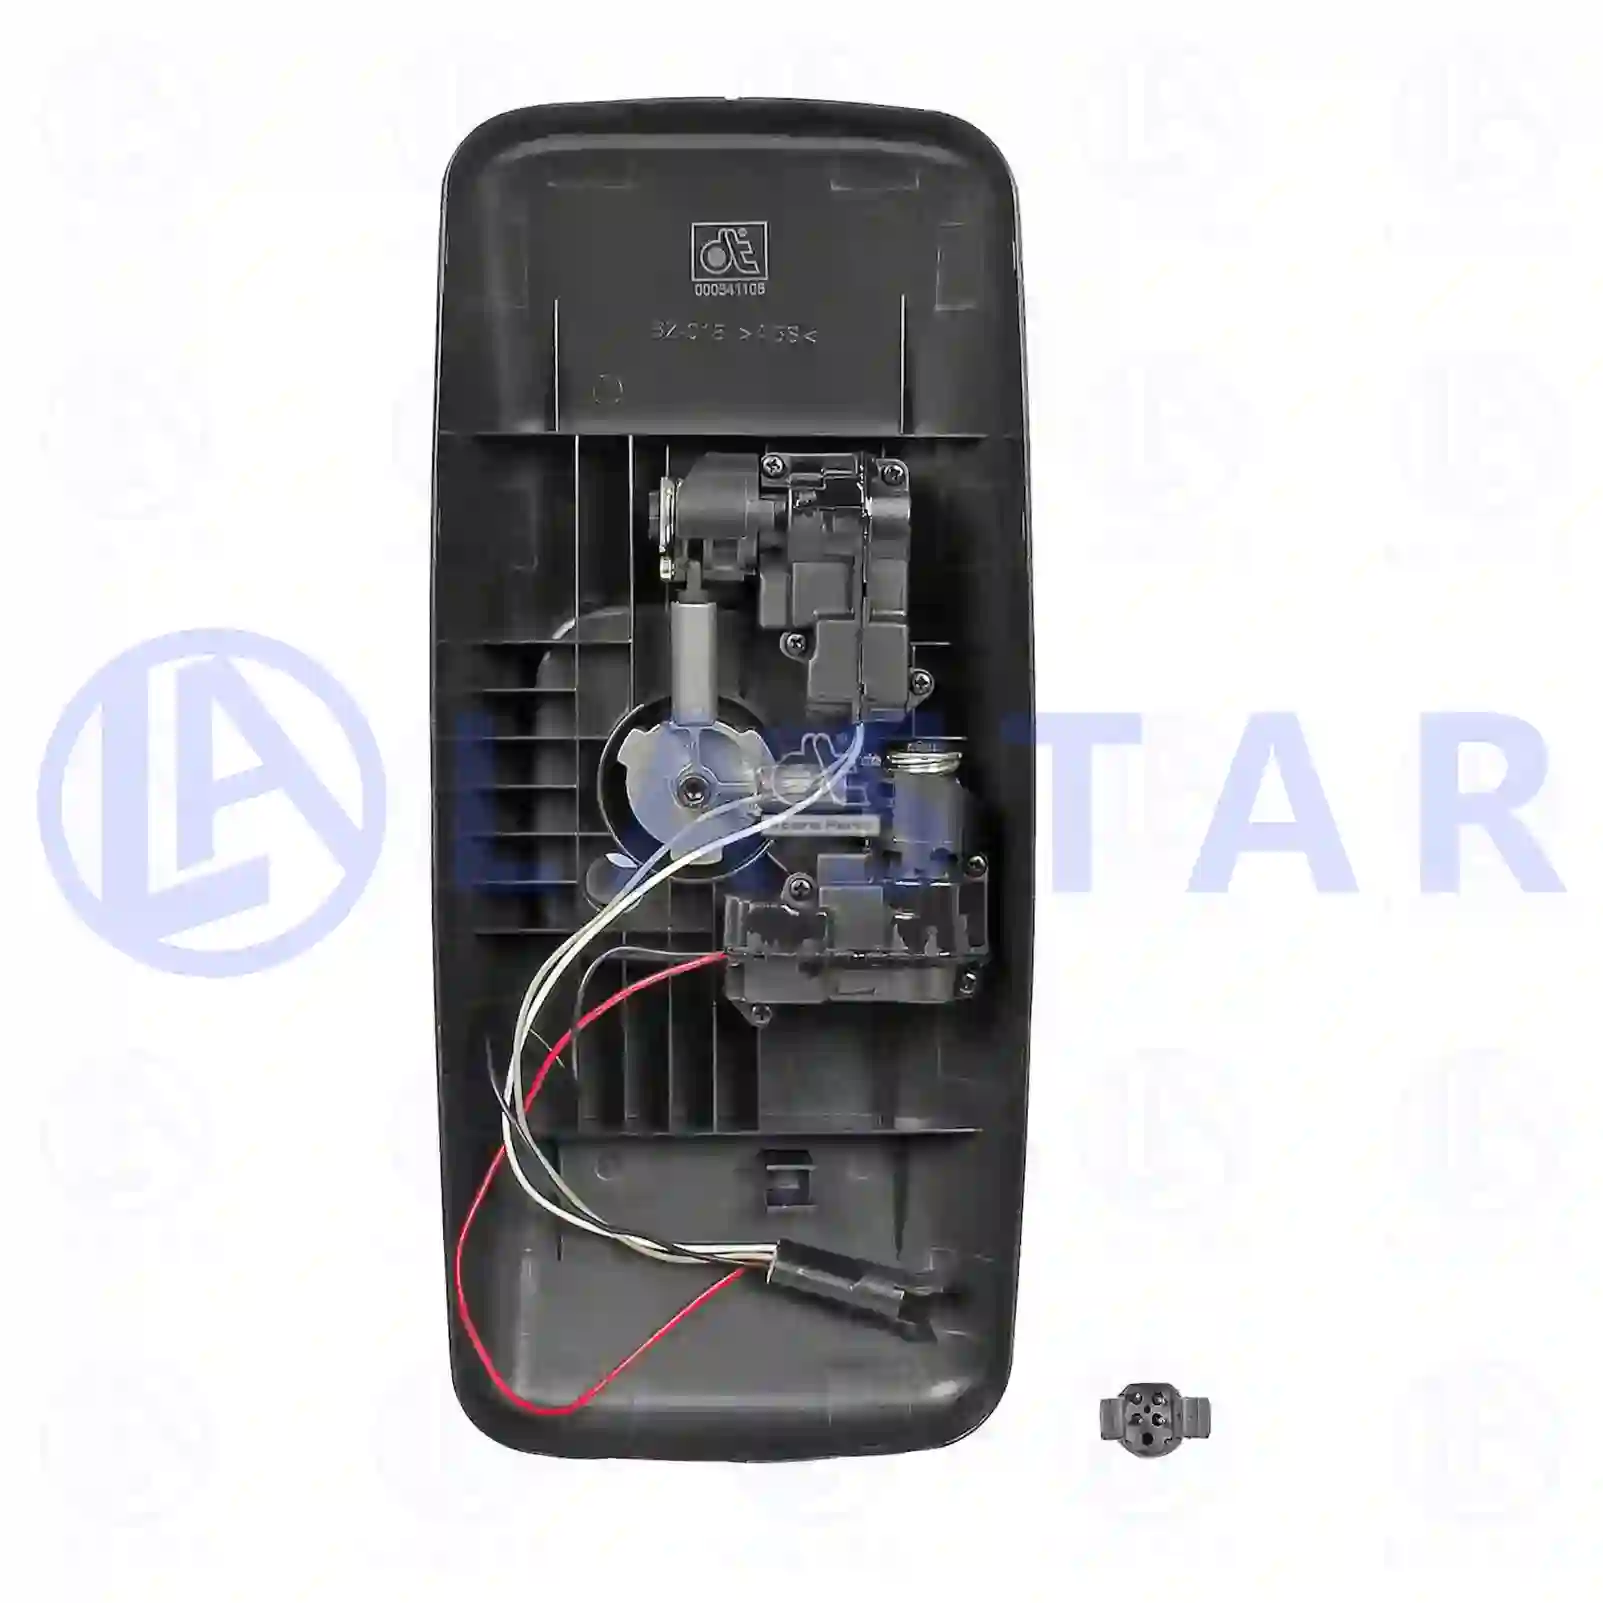 Mirror housing, main mirror, electrical, 77718879, 0008100379, ZG61030-0008 ||  77718879 Lastar Spare Part | Truck Spare Parts, Auotomotive Spare Parts Mirror housing, main mirror, electrical, 77718879, 0008100379, ZG61030-0008 ||  77718879 Lastar Spare Part | Truck Spare Parts, Auotomotive Spare Parts